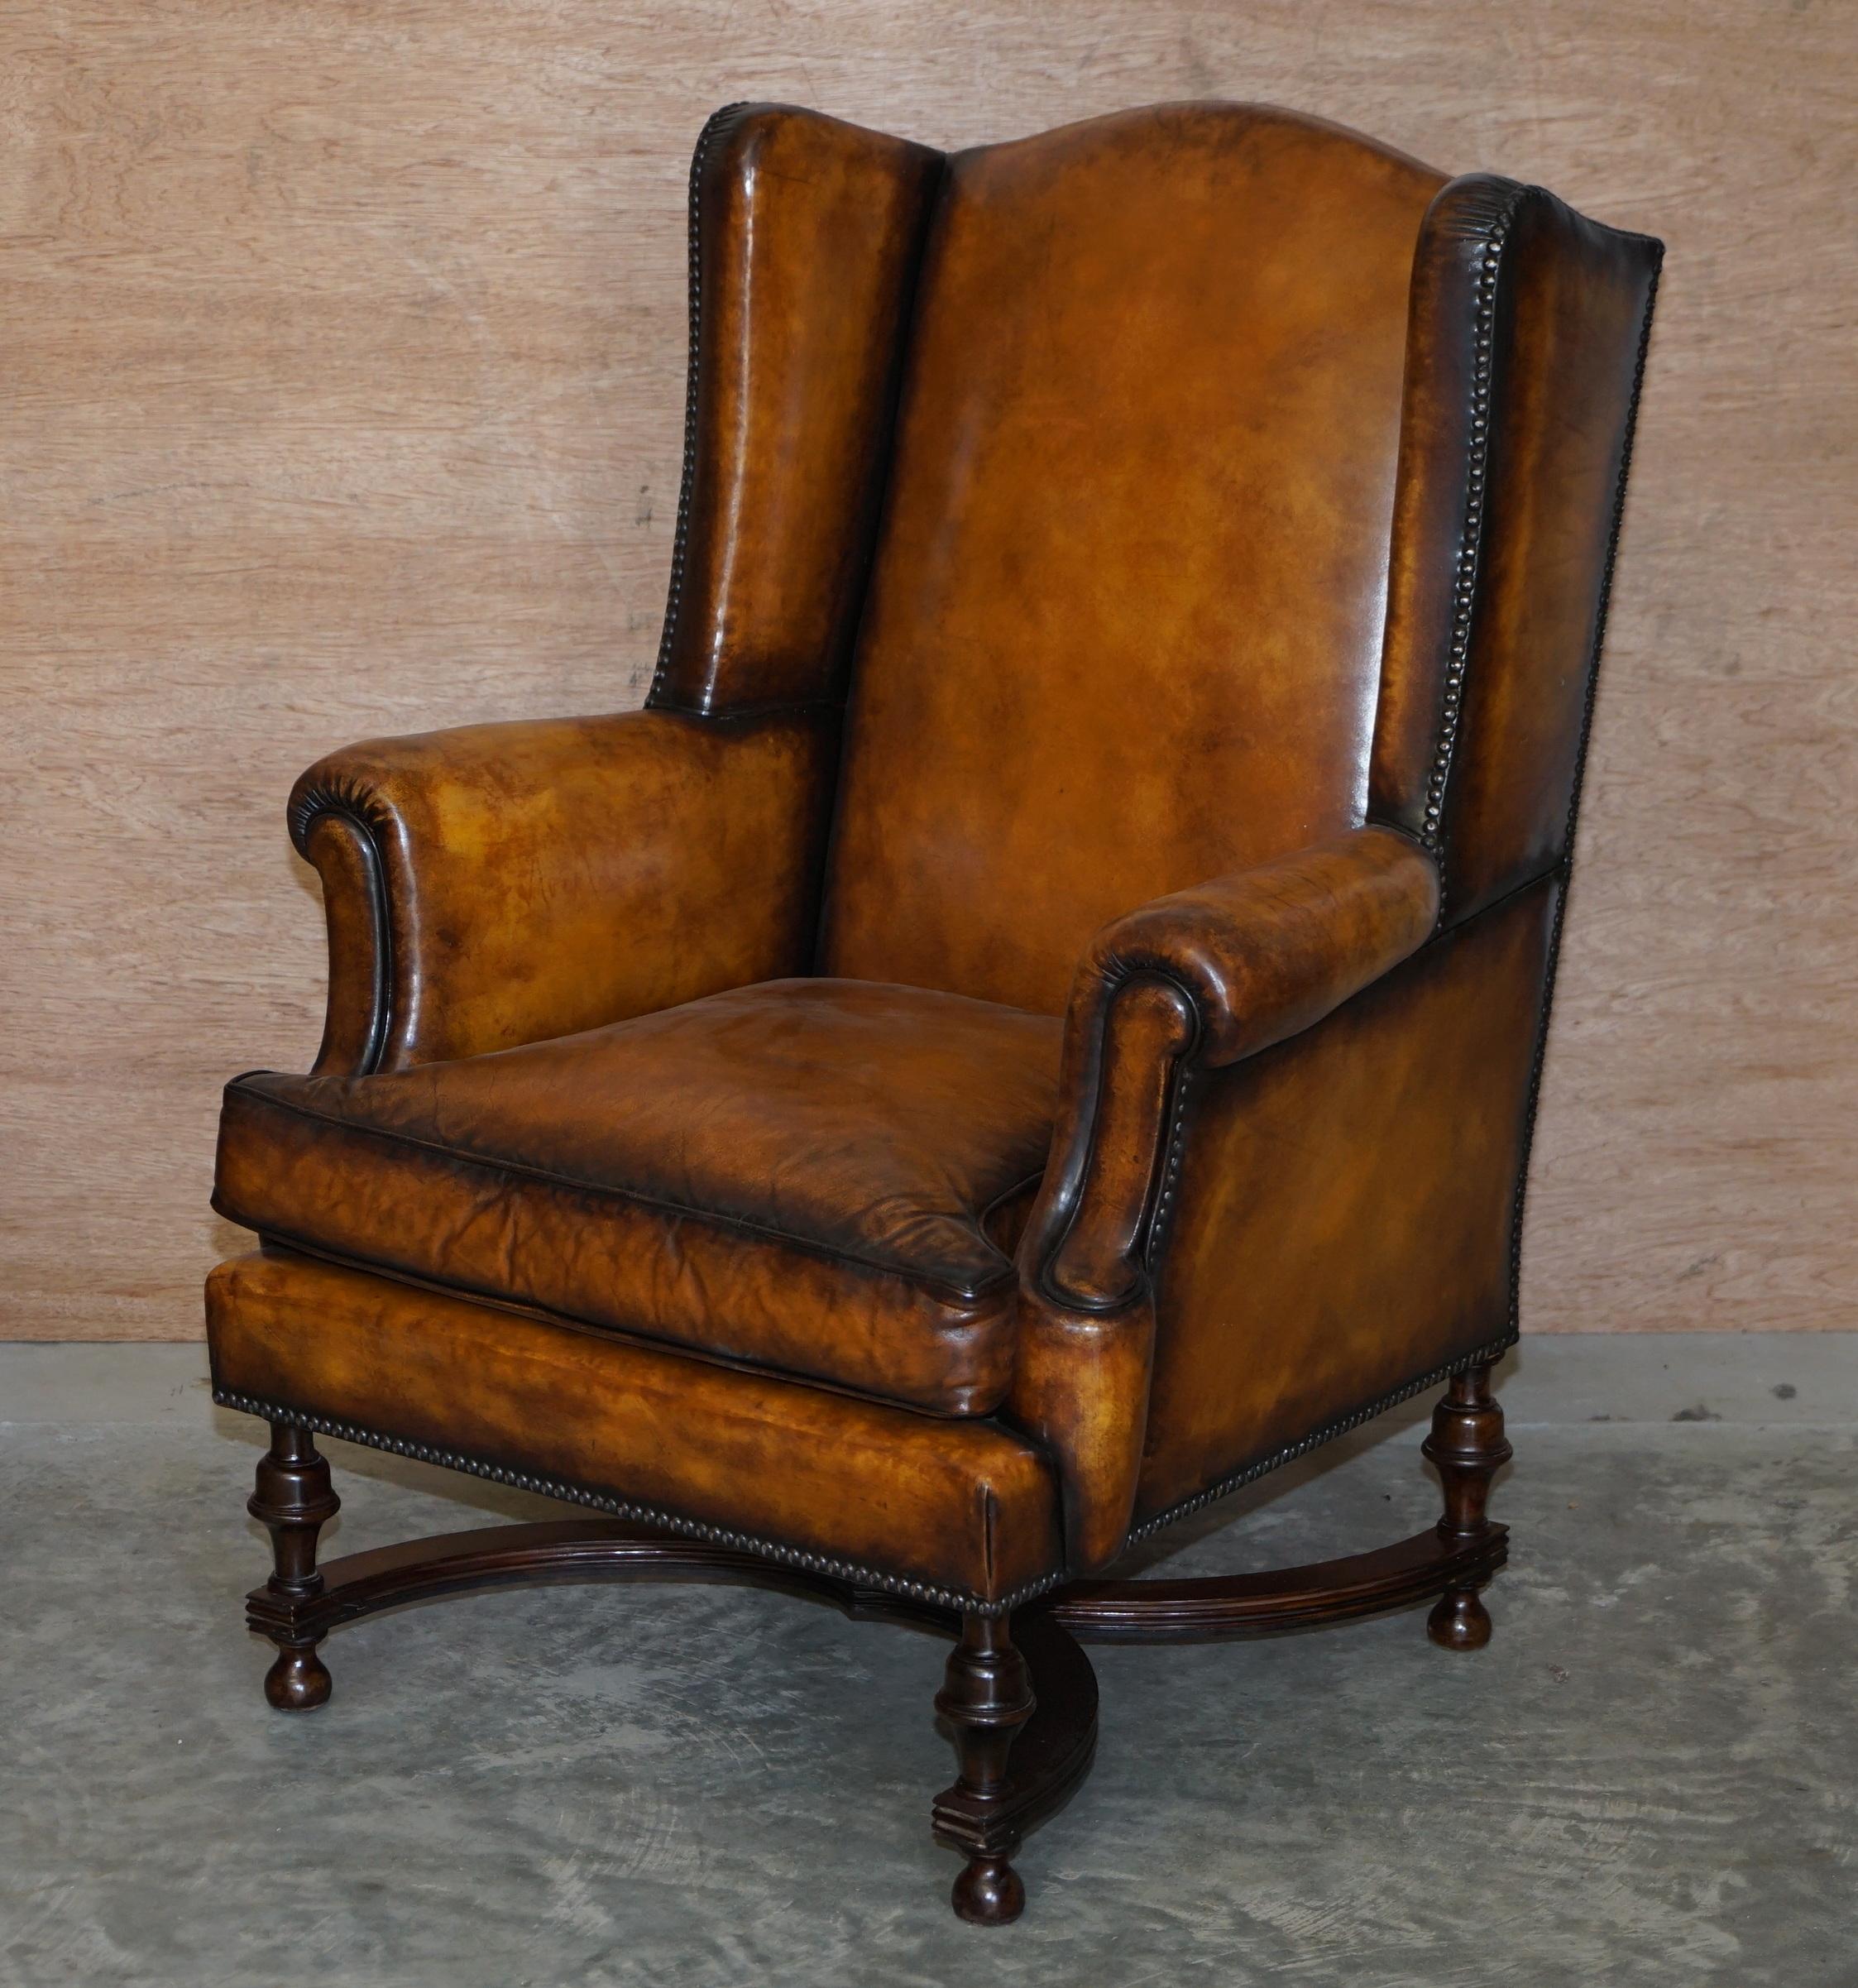 We are delighted to offer for sale this very fine pair of fully restored high Victorian circa 1880 hand dyed whiskey brown leather William & Mary style wingback armchairs

These chairs are very fine examples, they have ornate William & Mary style